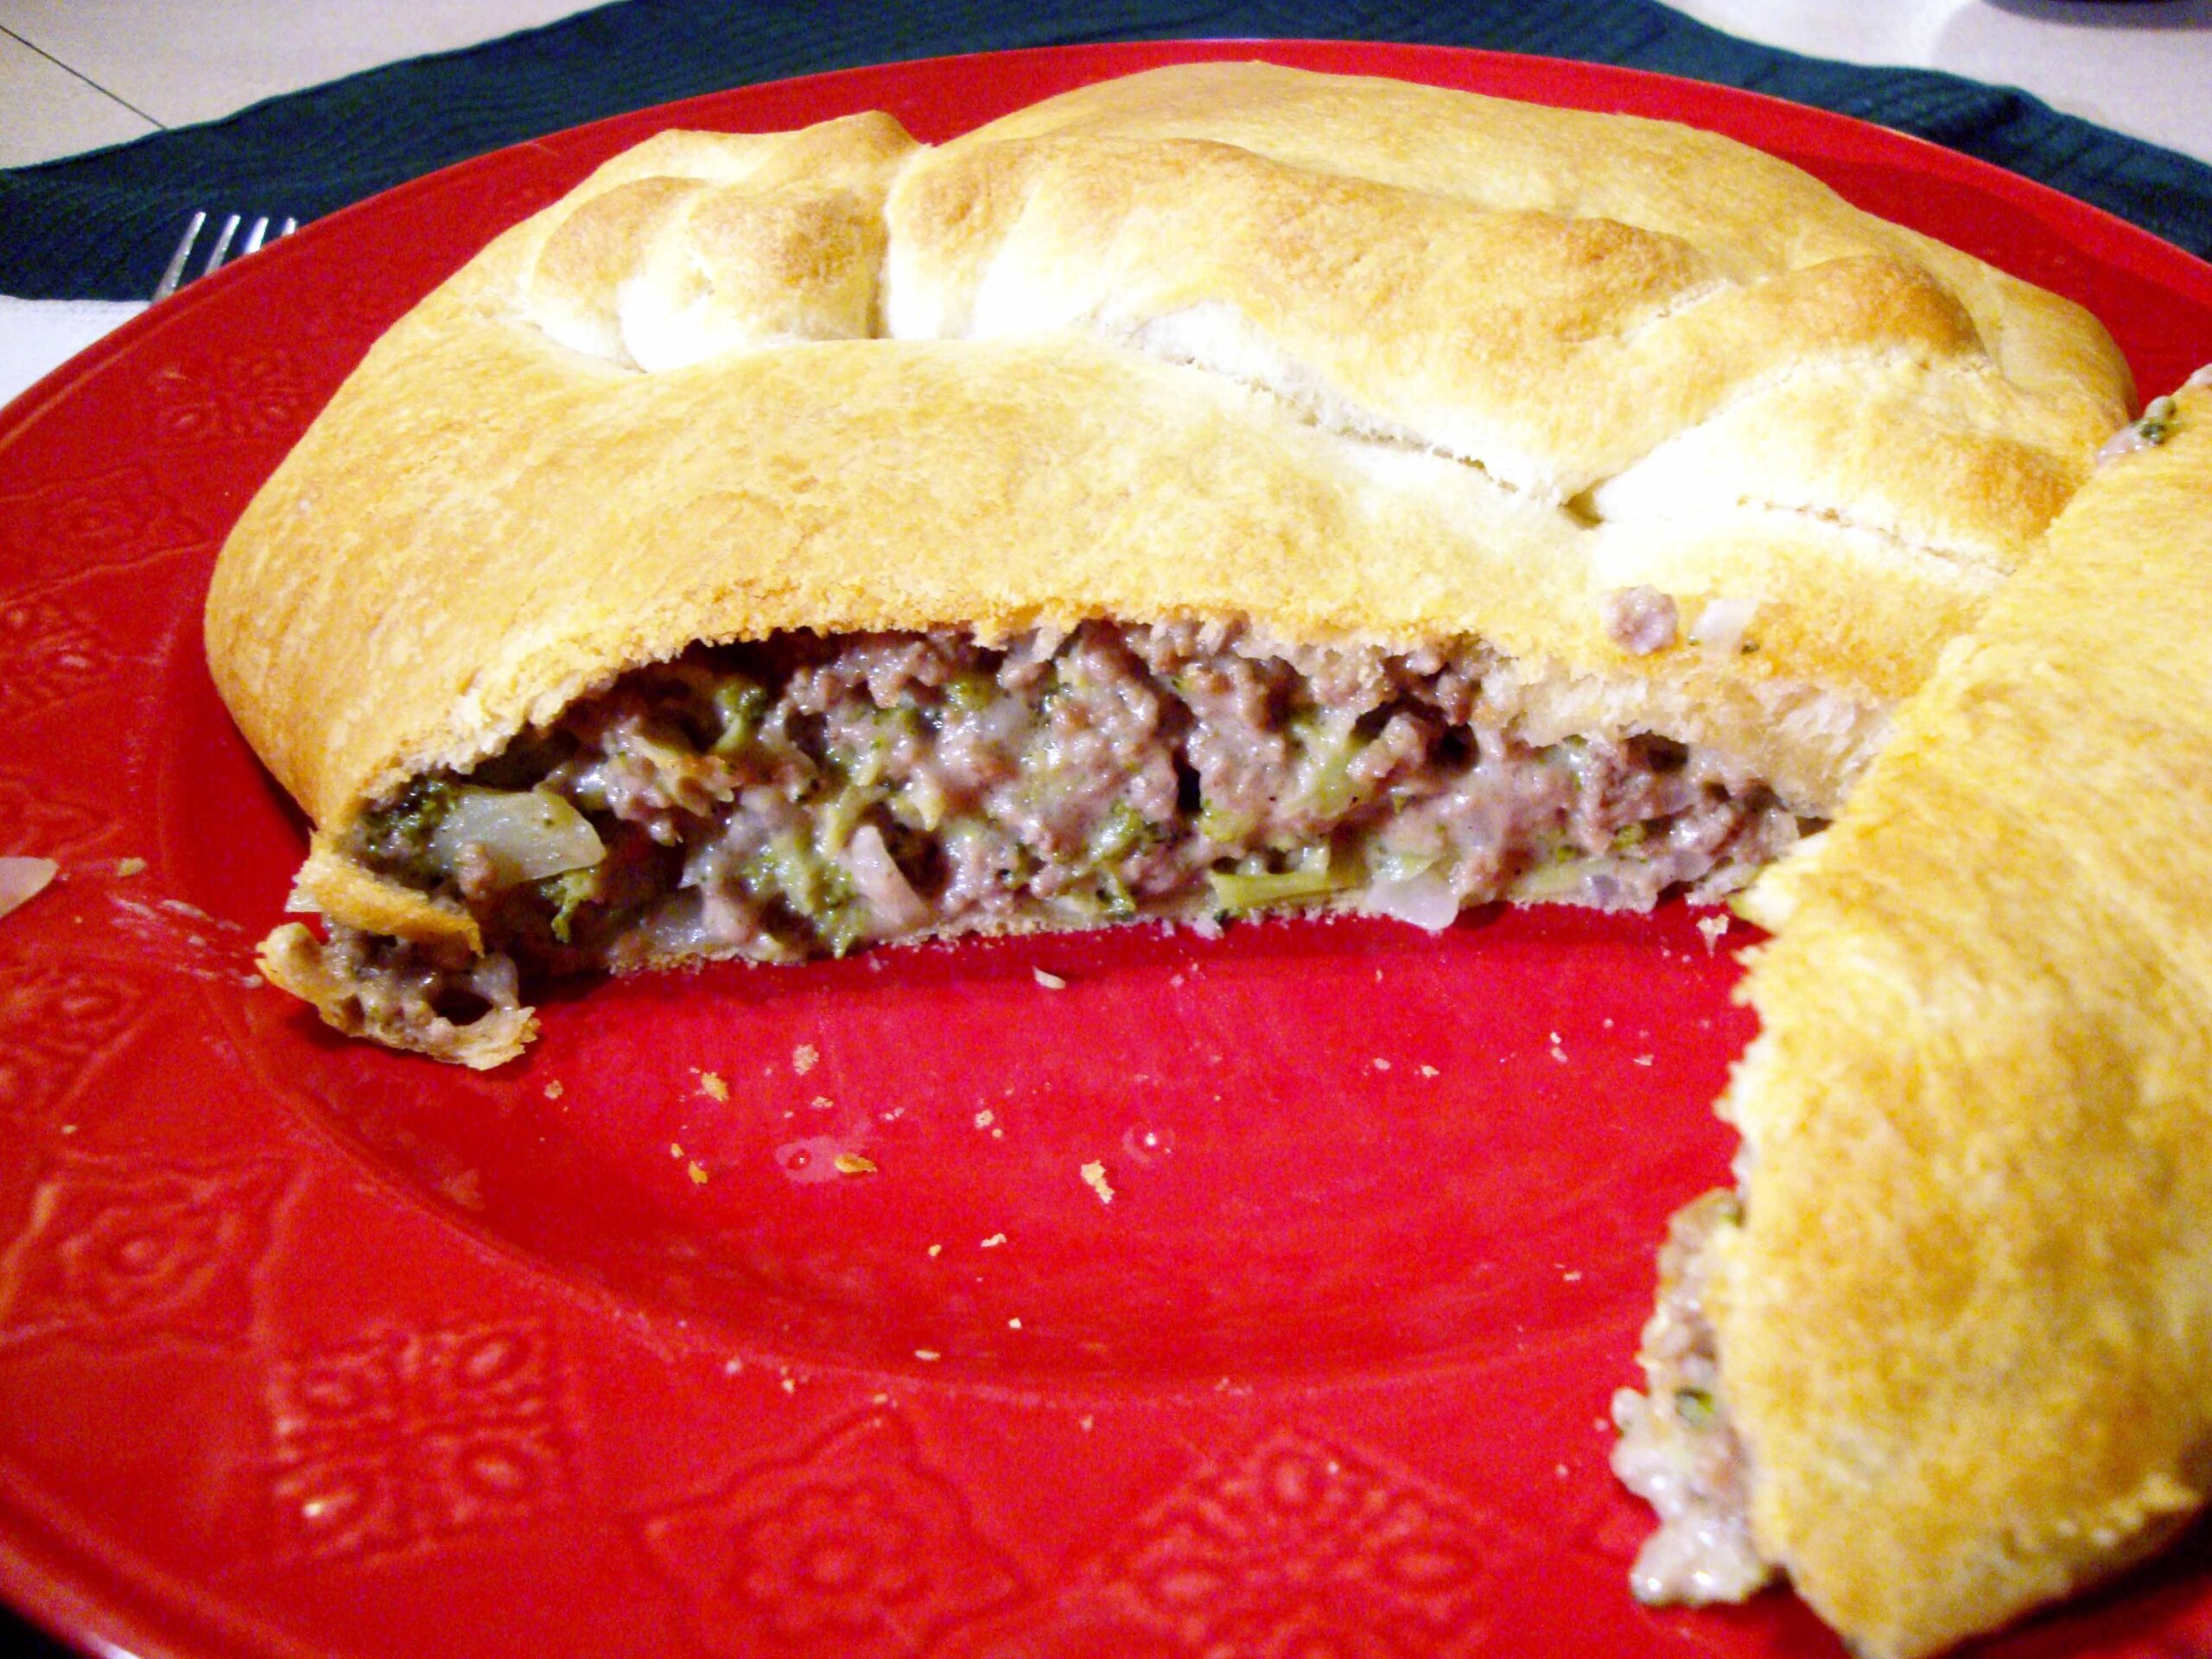  The combination of savory beef and fresh broccoli creates a delicious and hearty filling for the Wellington.